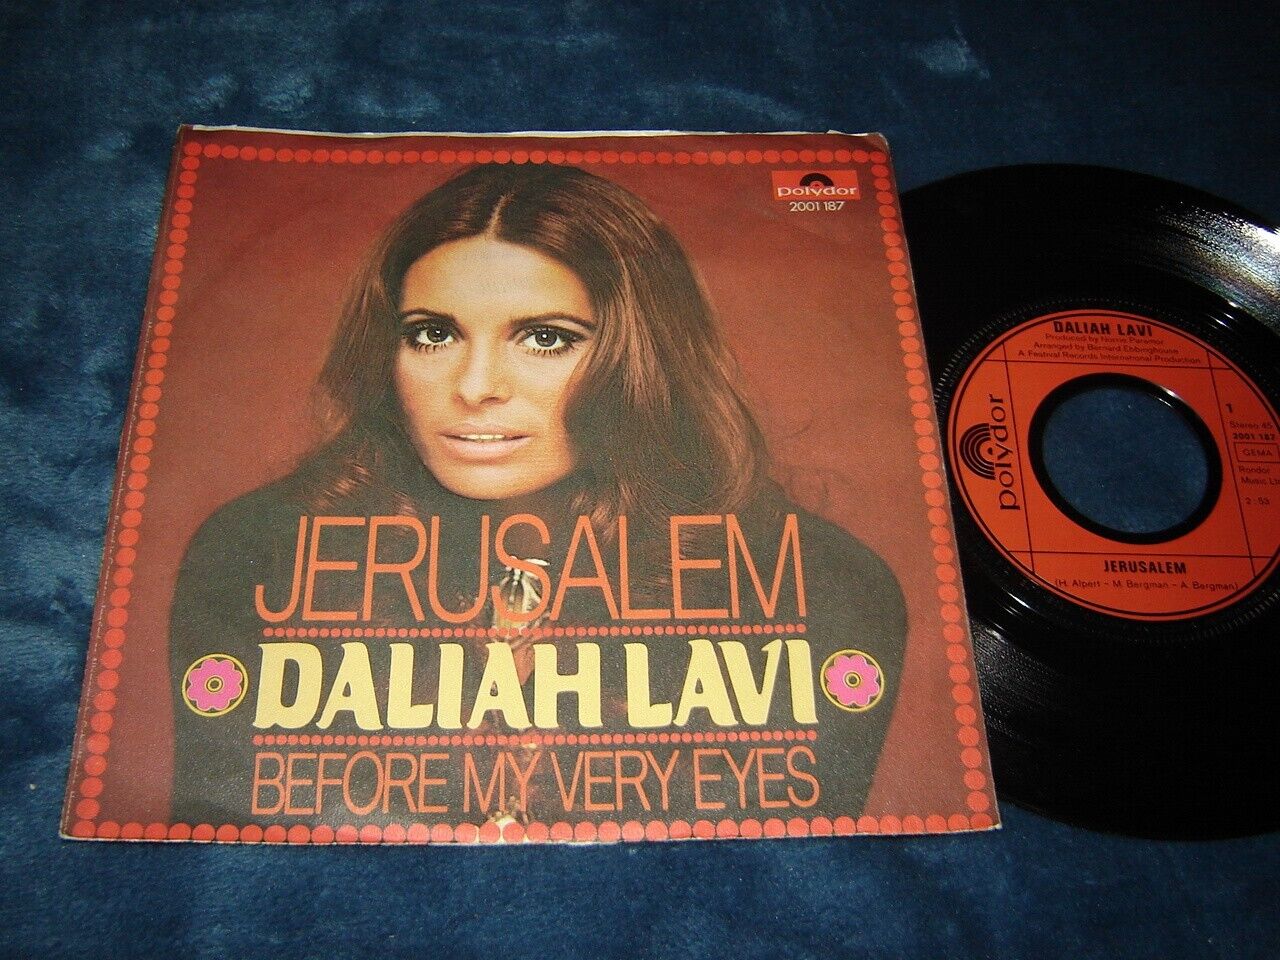 Daliah Lavi - Jerusalem / Before My Very Eyes 45 with picture sleeve Polydor